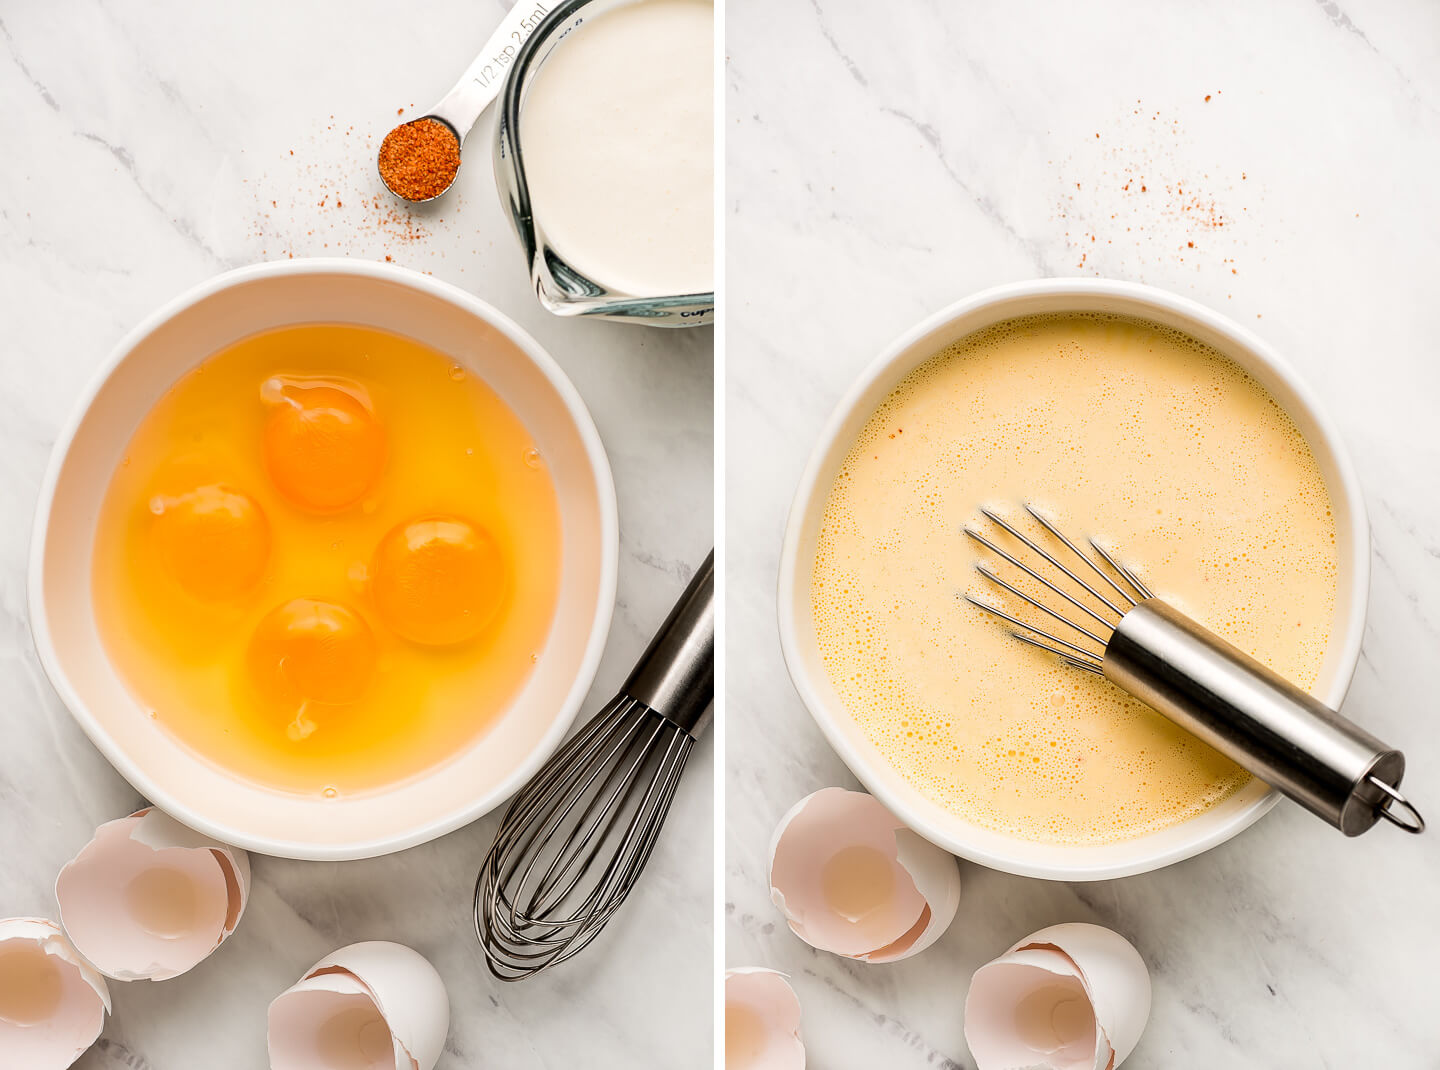 Diptych- Bowl of eggs with cream and spice to the side; all mixed together in the bowl.